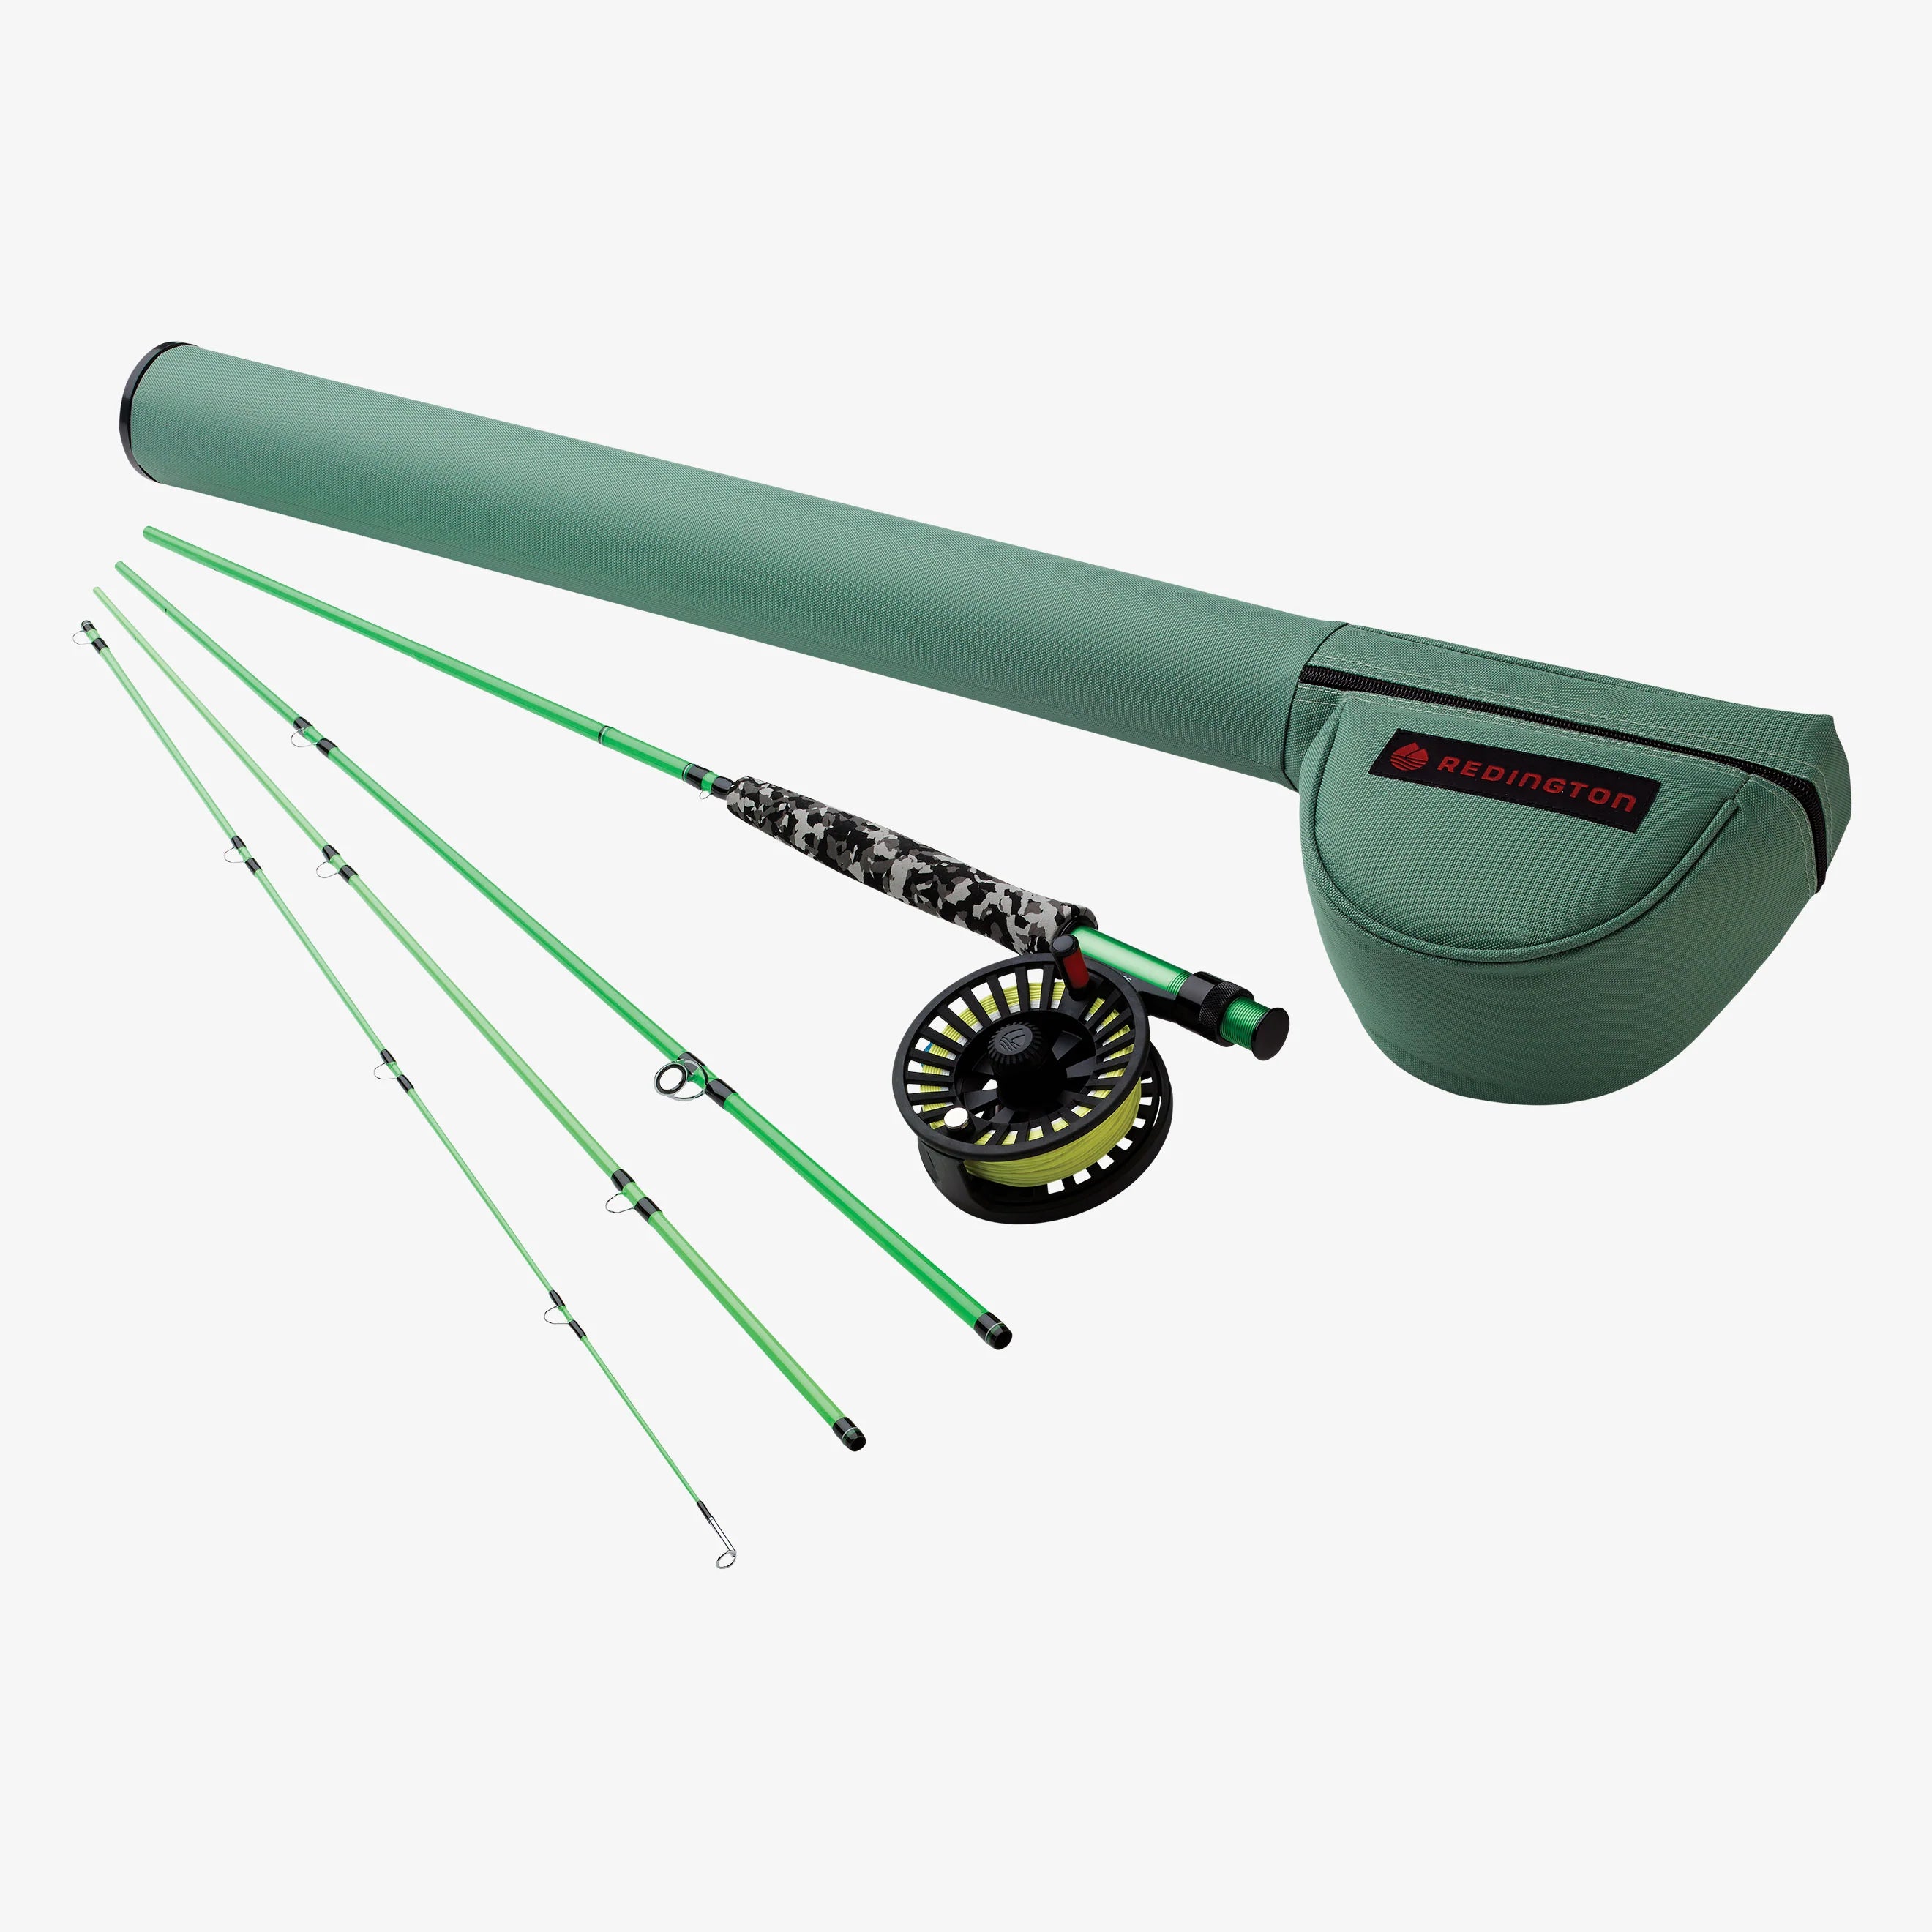 Dodd's Sporting Goods. Ready 2 Fish R2f4 Fly Combo 9' 2Pc 5/6Wt W/Pre-Spooled  Reel & W/Lure & Rigging Kit